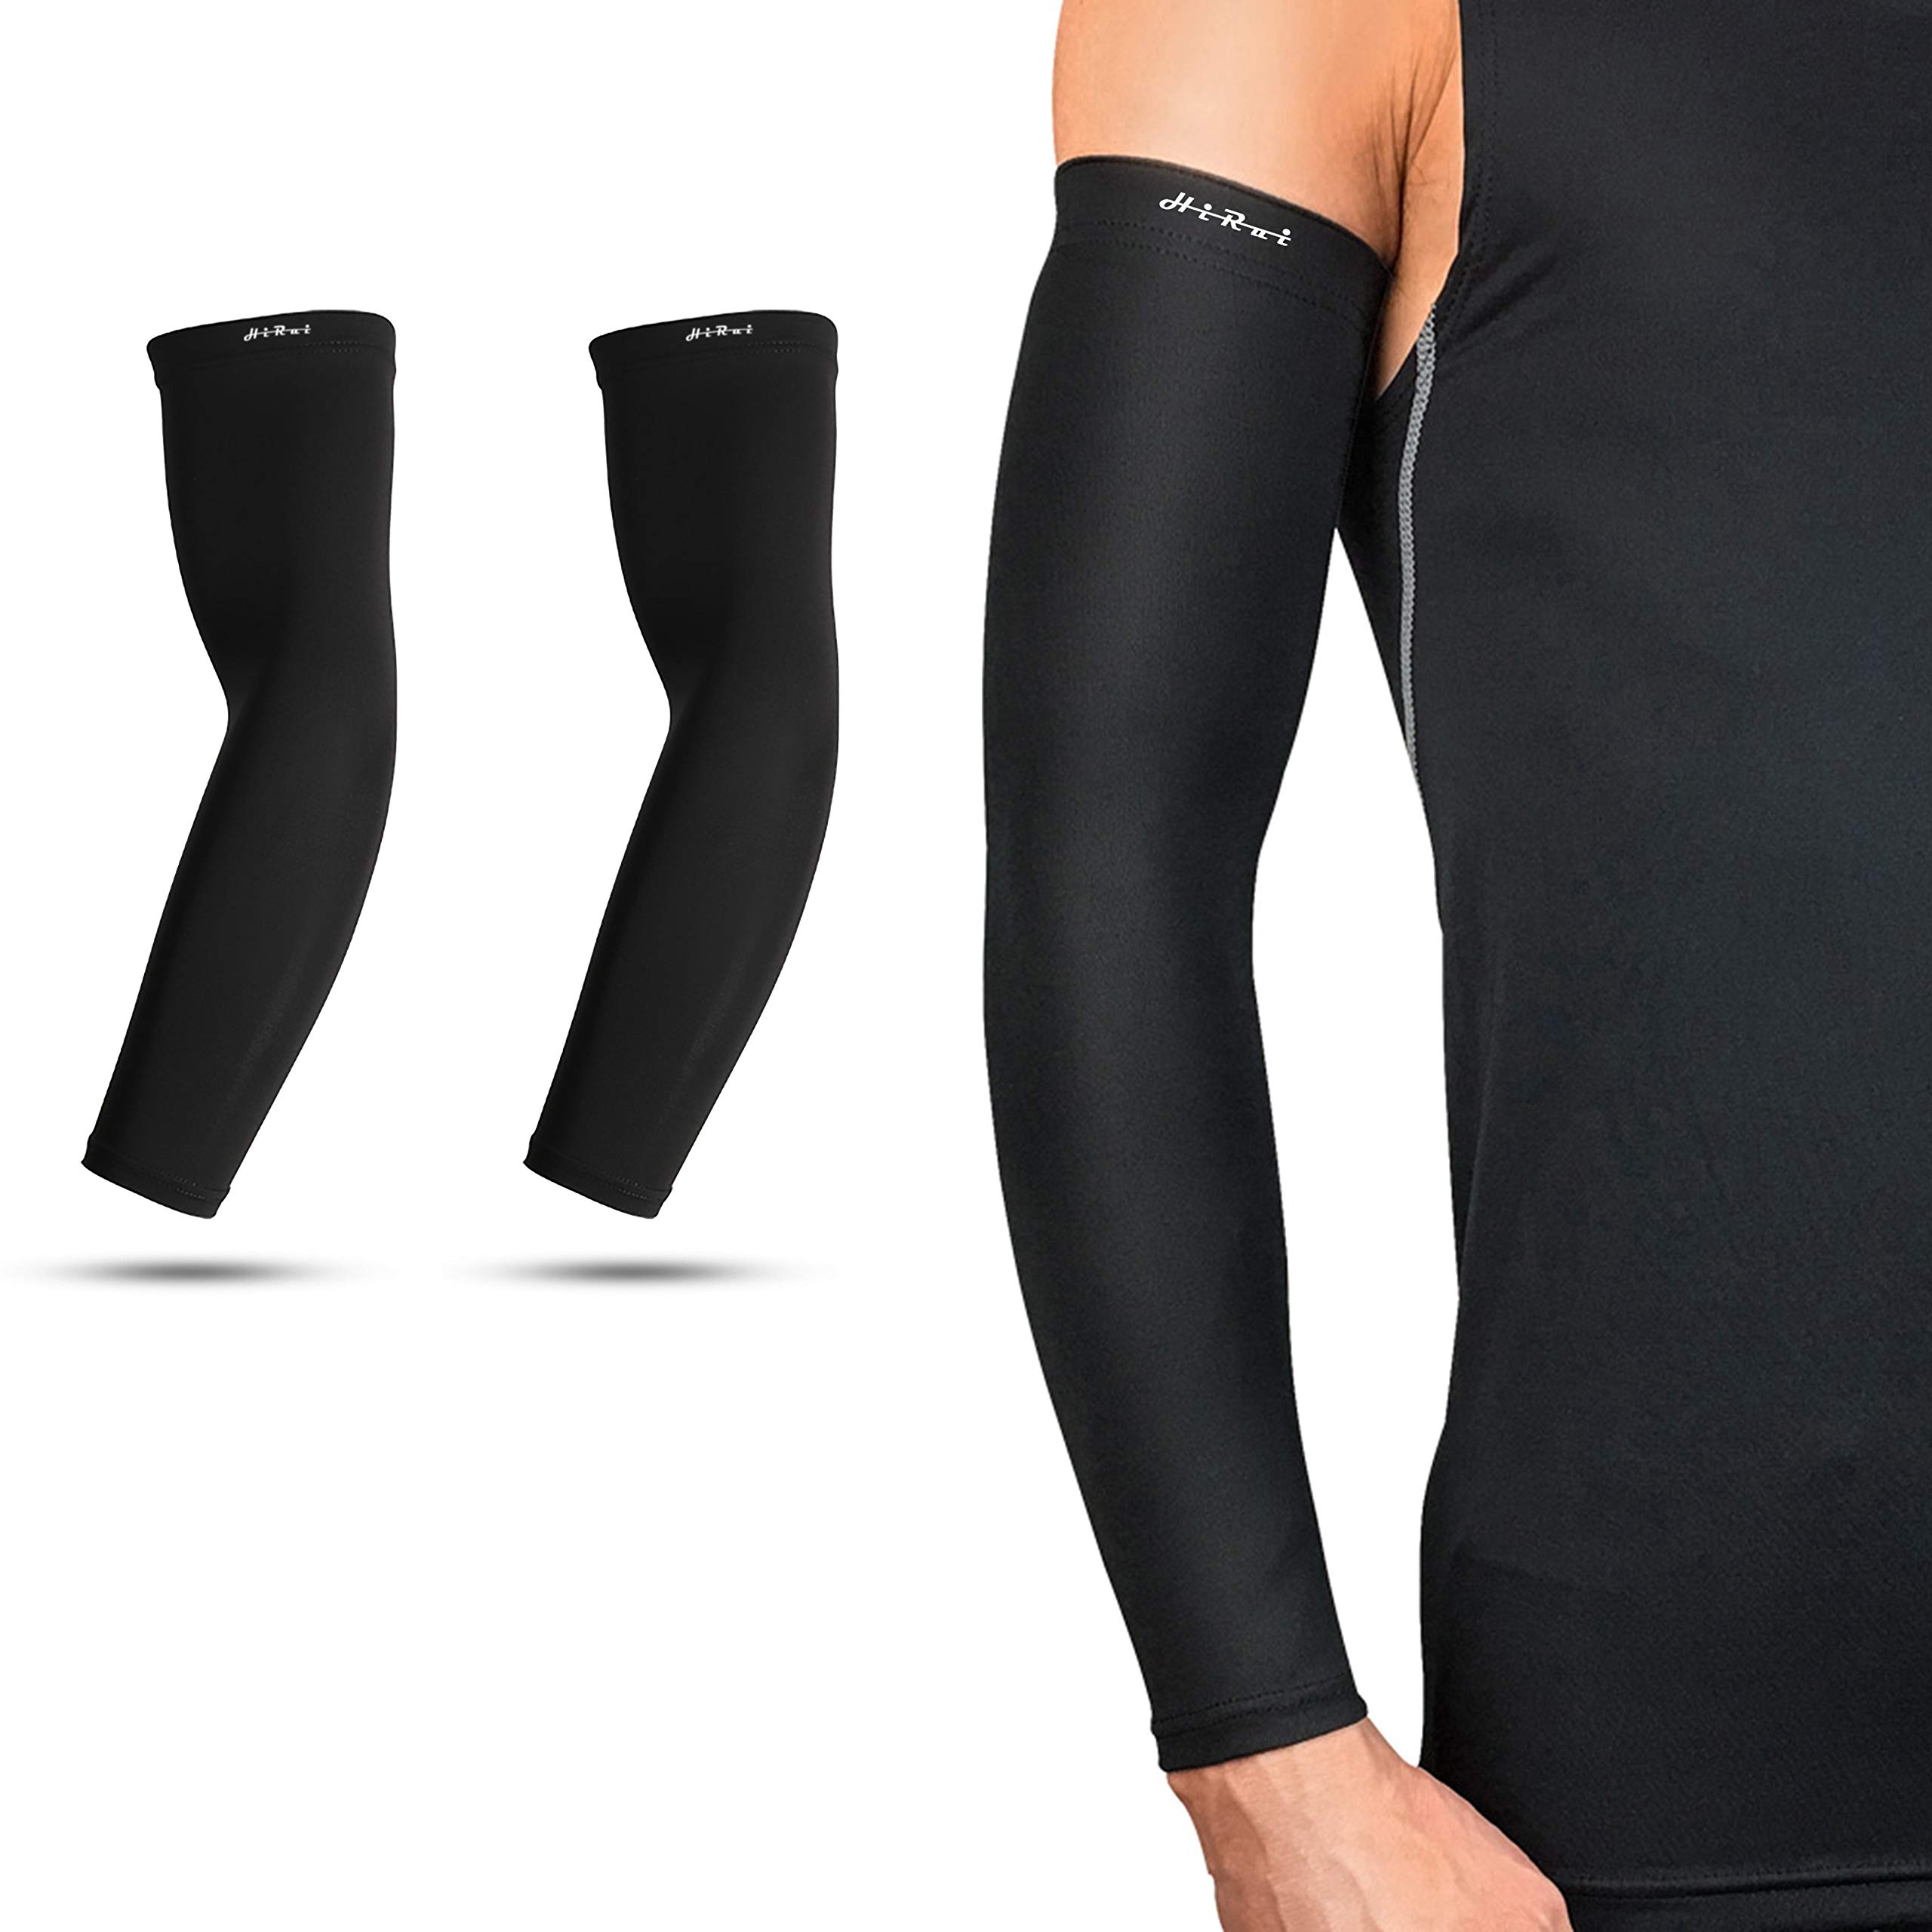 HiRui Warm Arm Compression Sleeves 20-30mmHg Recovery Relieve Pain